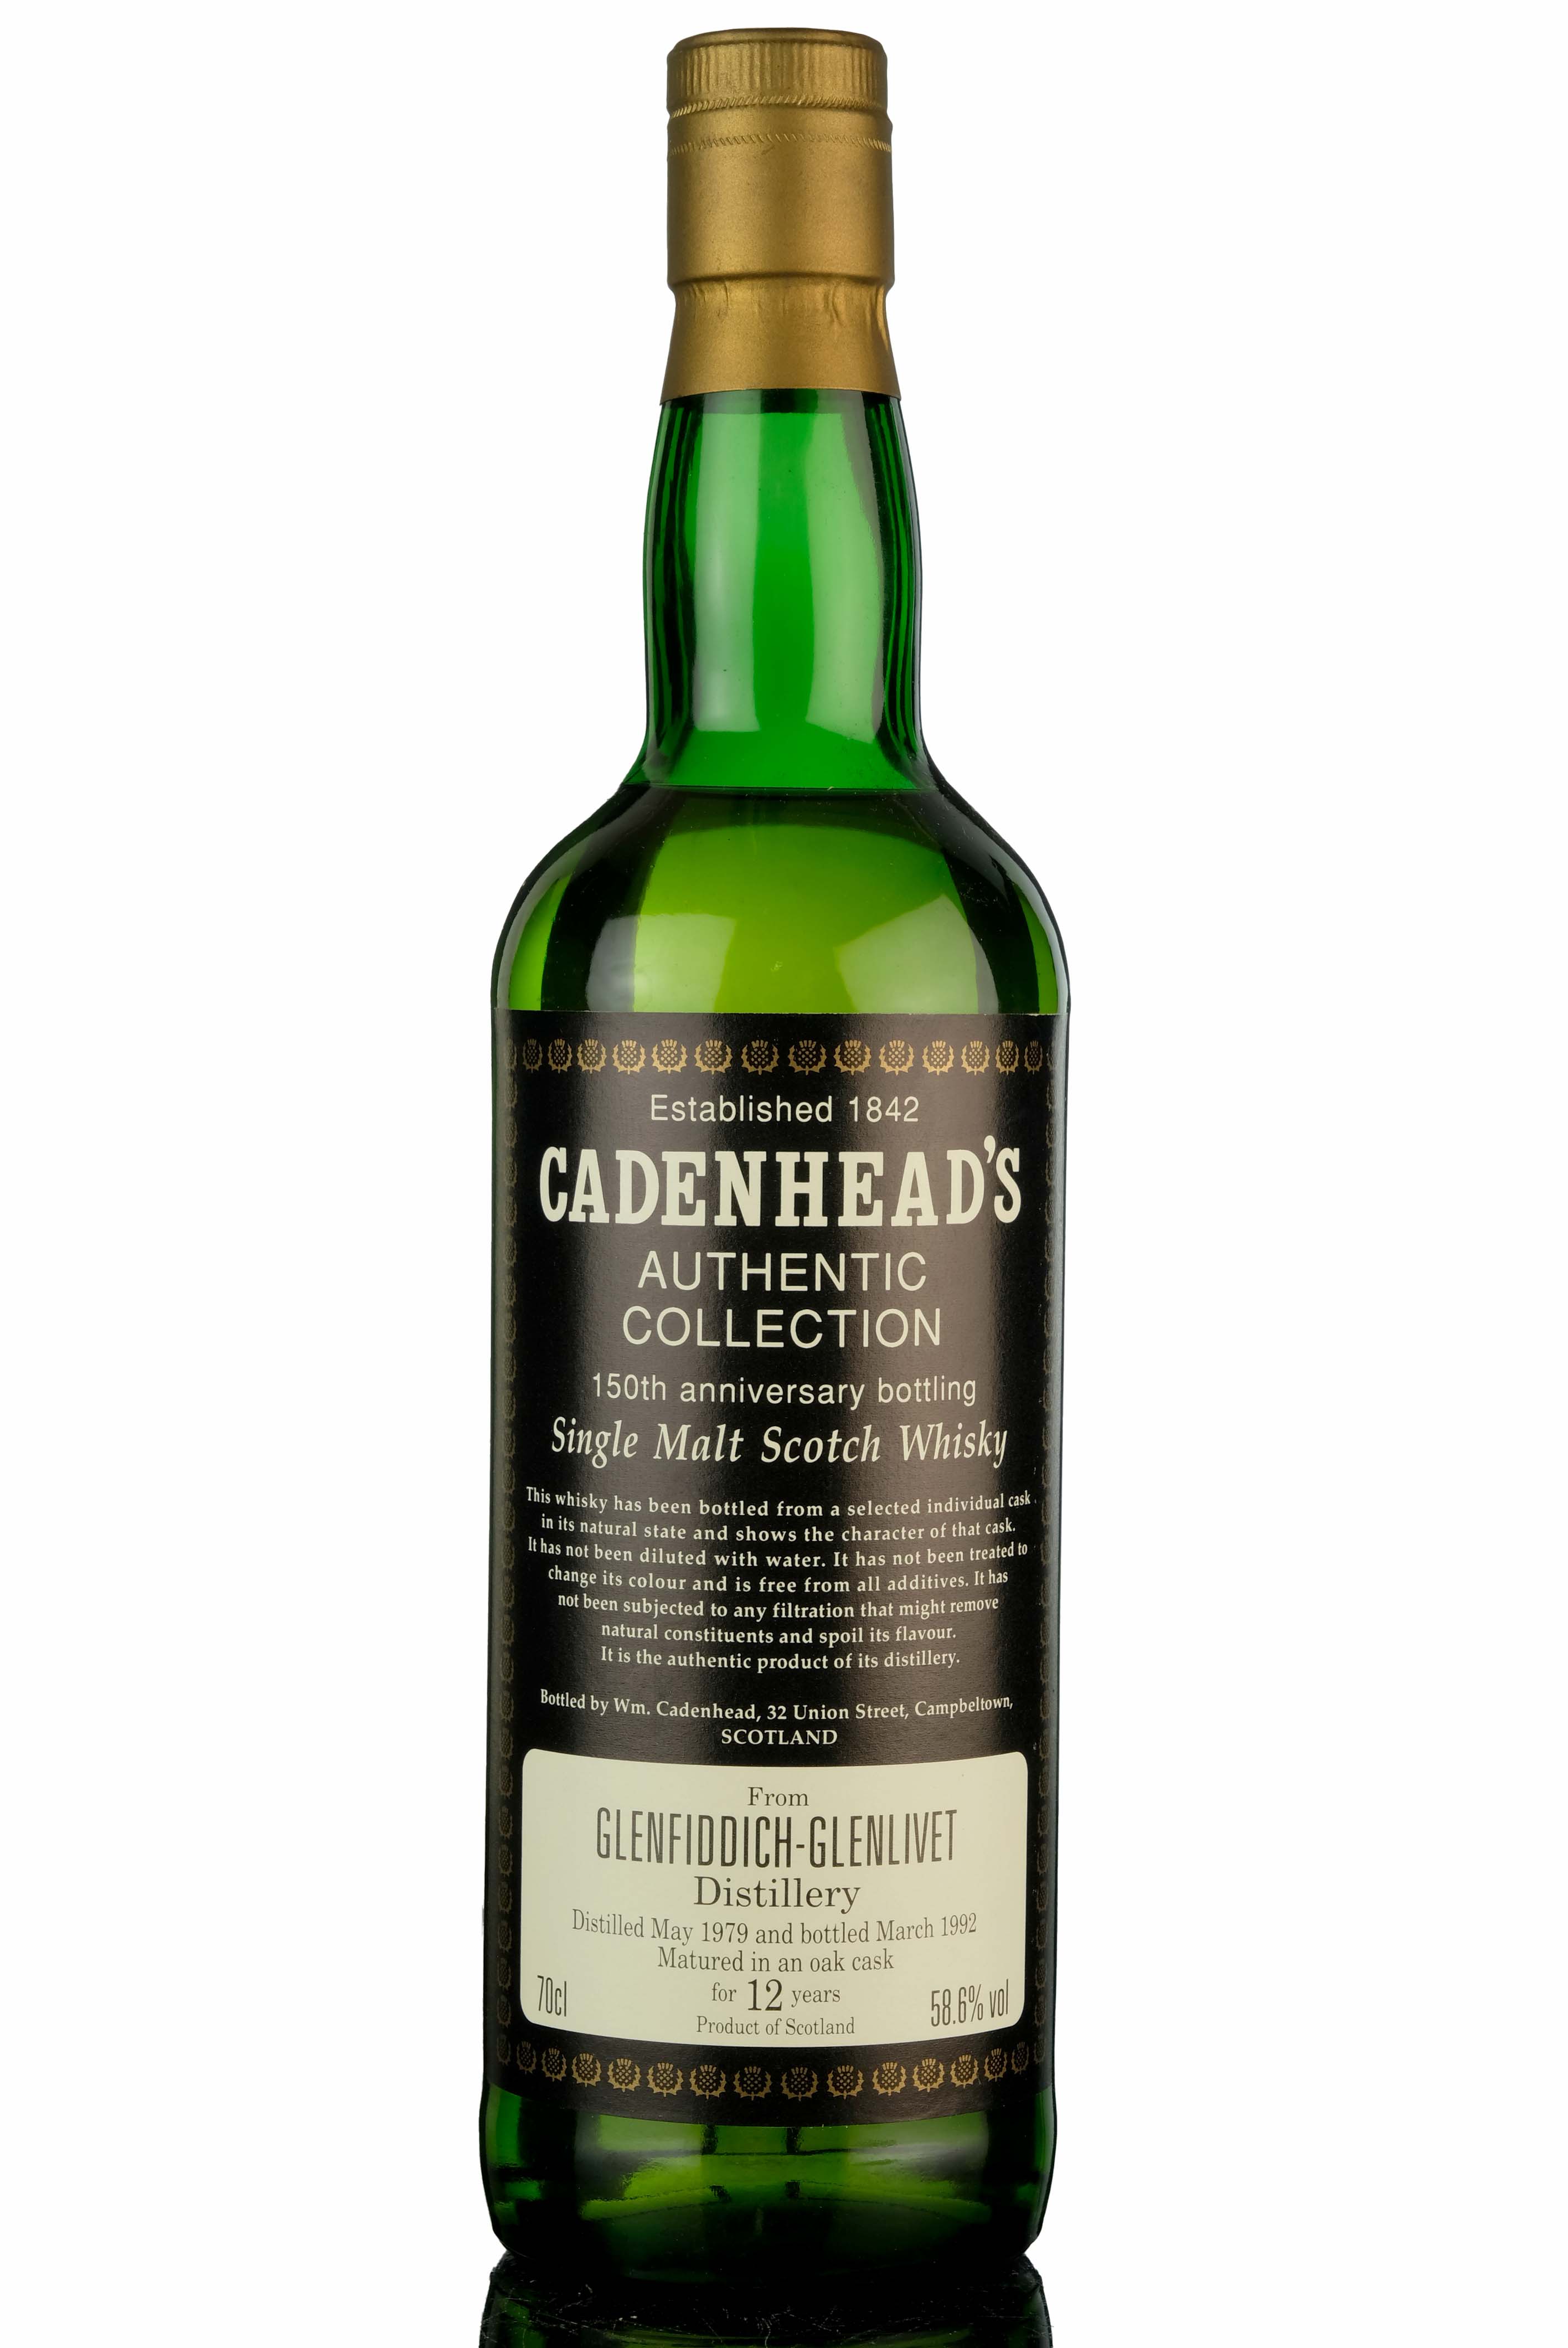 Glenfiddich-Glenlivet 1979-1992 - 12 Year Old - Cadenheads Authentic Collection